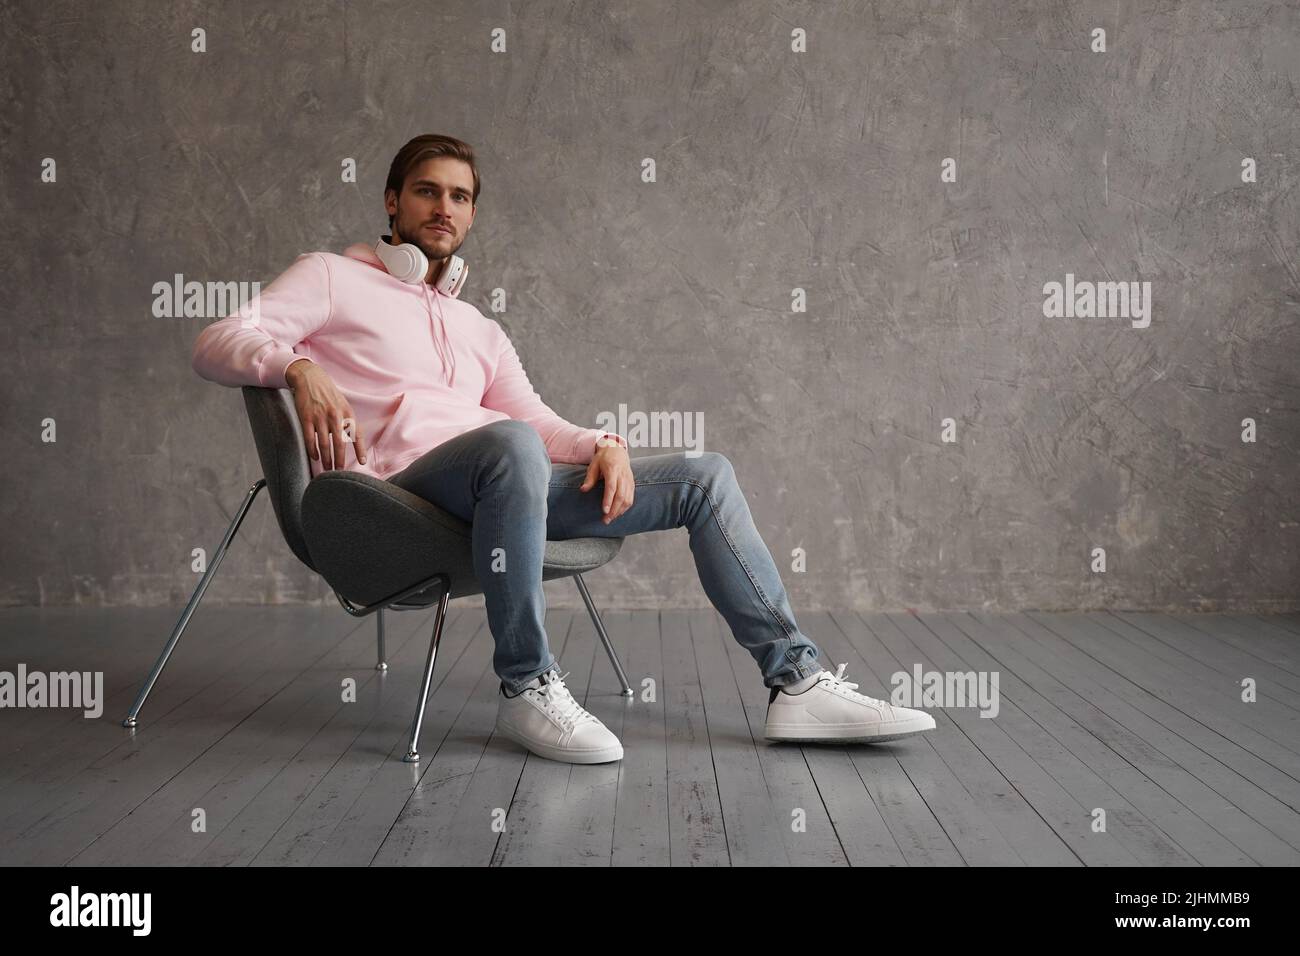 Feeling comfortable anywhere. Full length of handsome young man looking at camera while sitting against gray background Stock Photo